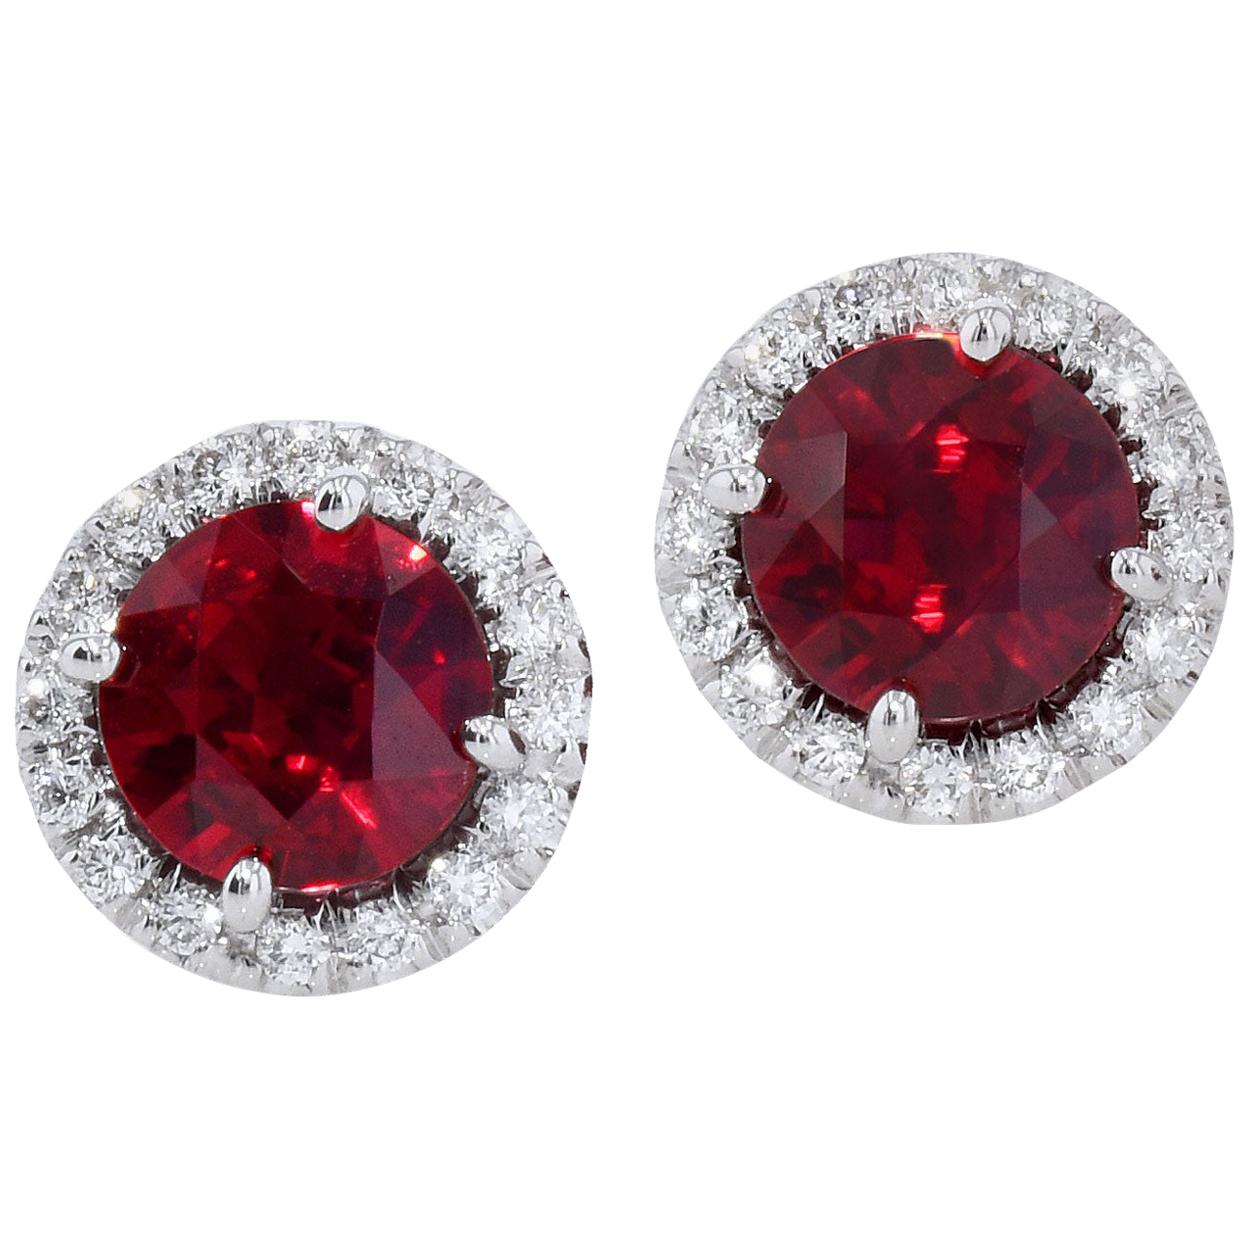 Mozambique Ruby with Diamond Halos Stud Earrings